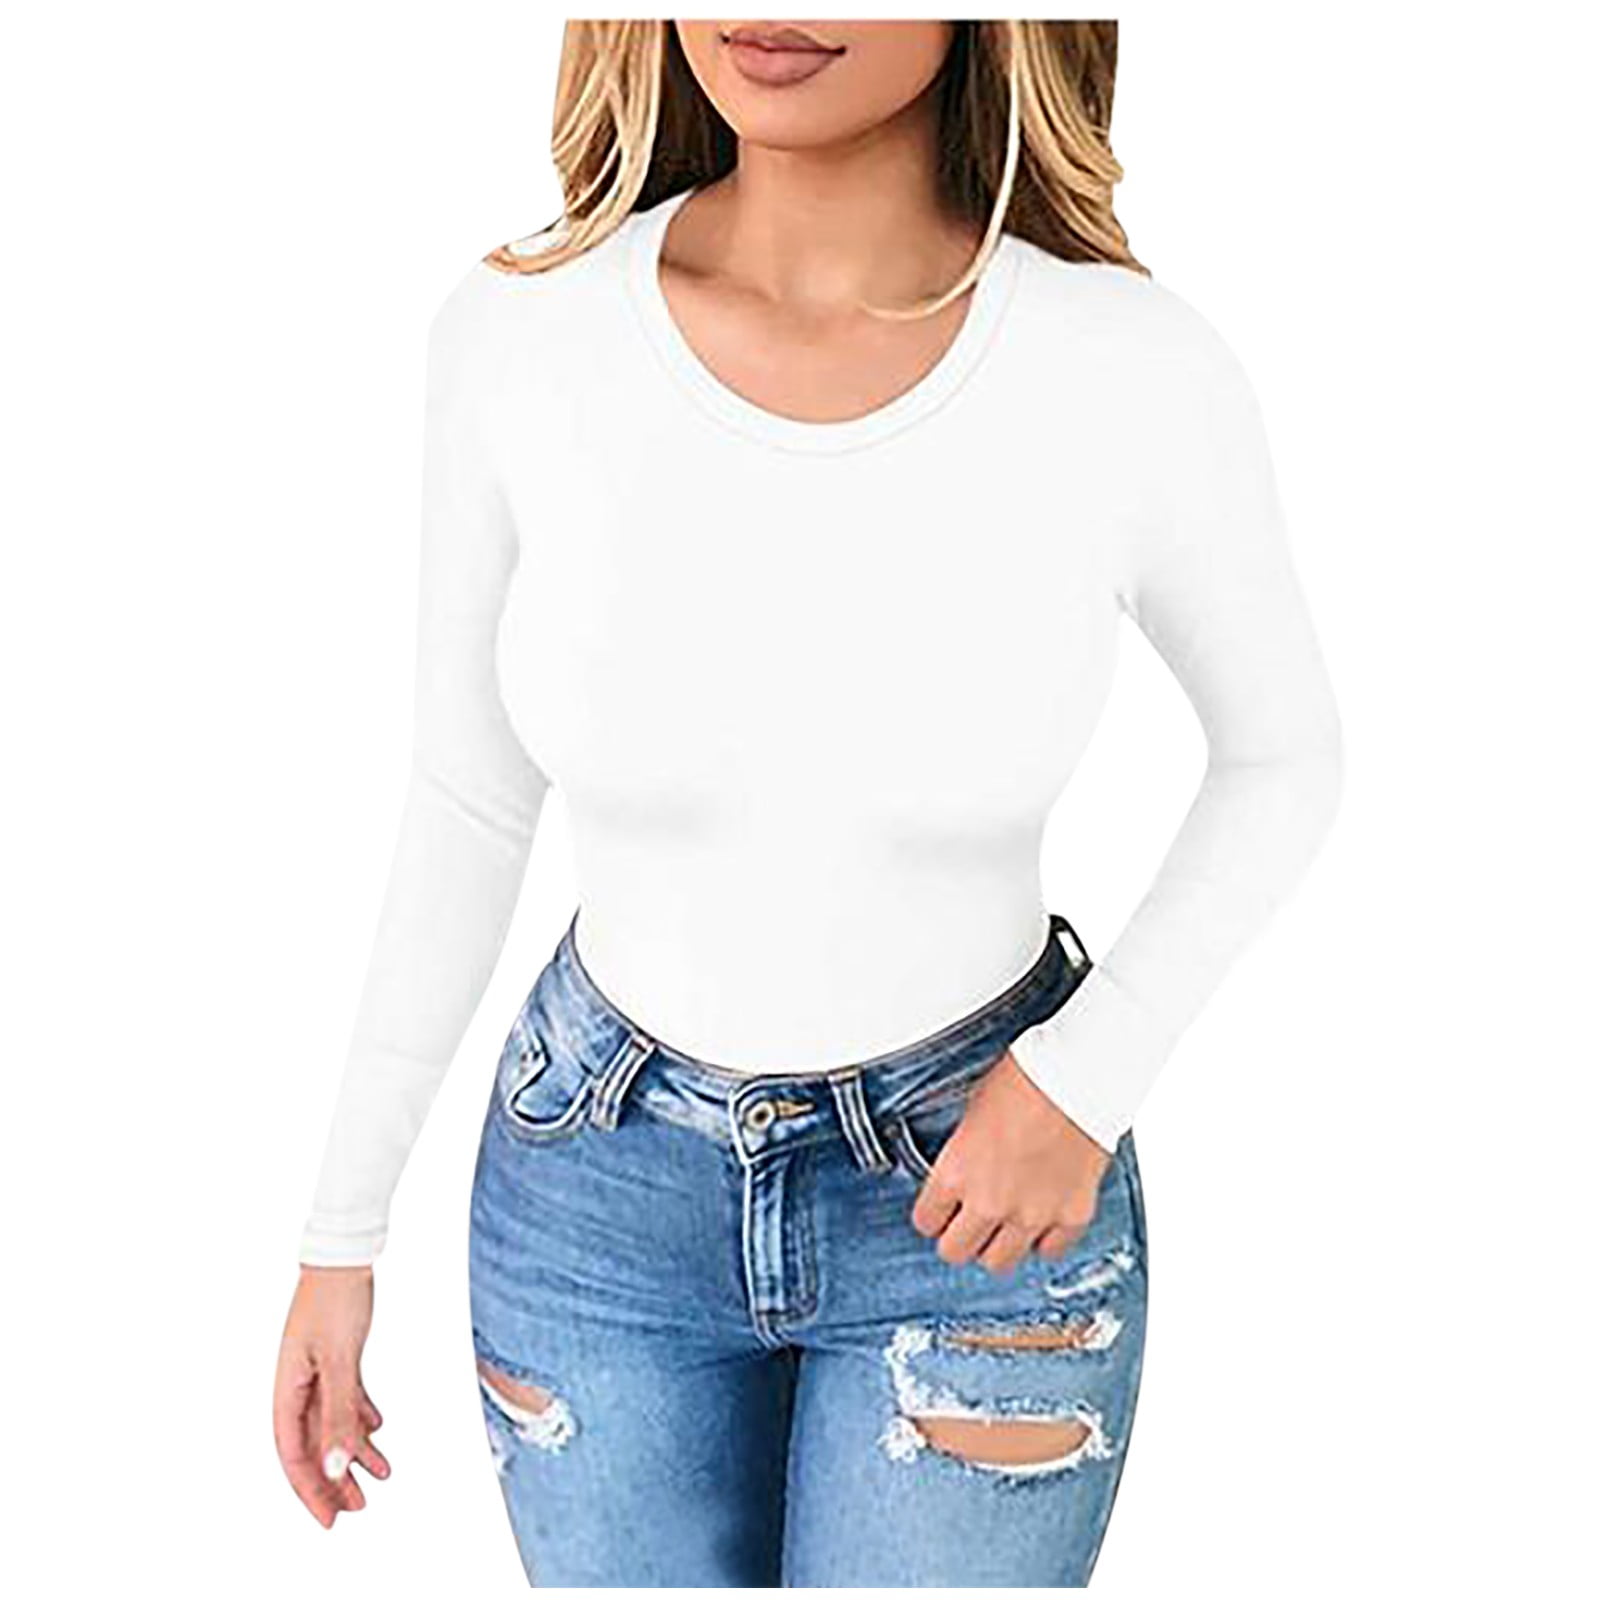 Clearance Clothes Under $5.00 ! BVnarty Women's Top Knit Pocket